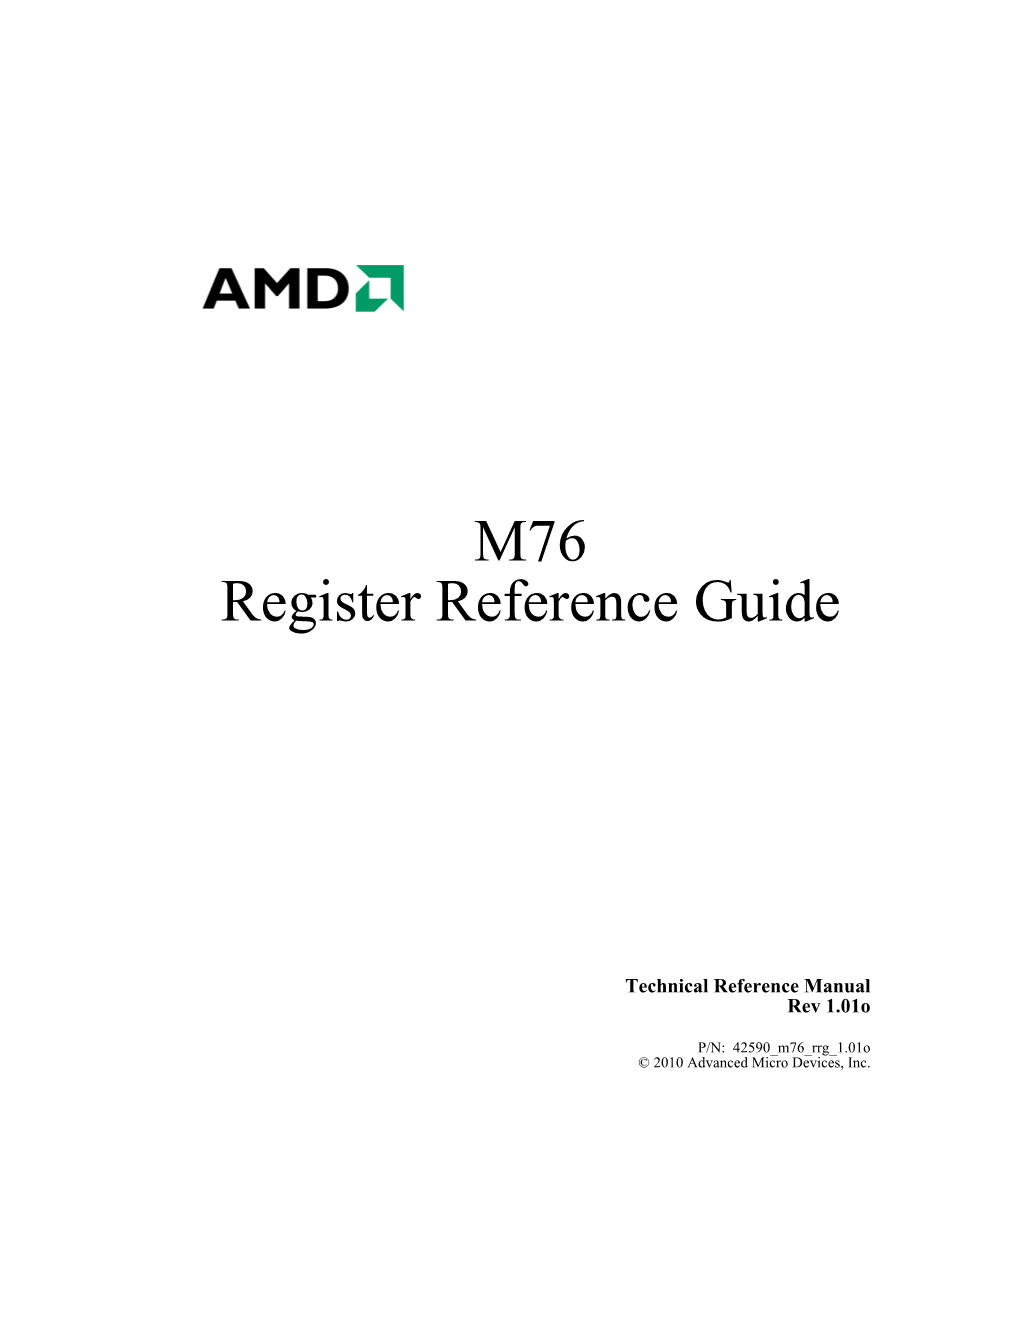 M76 Register Reference Guide